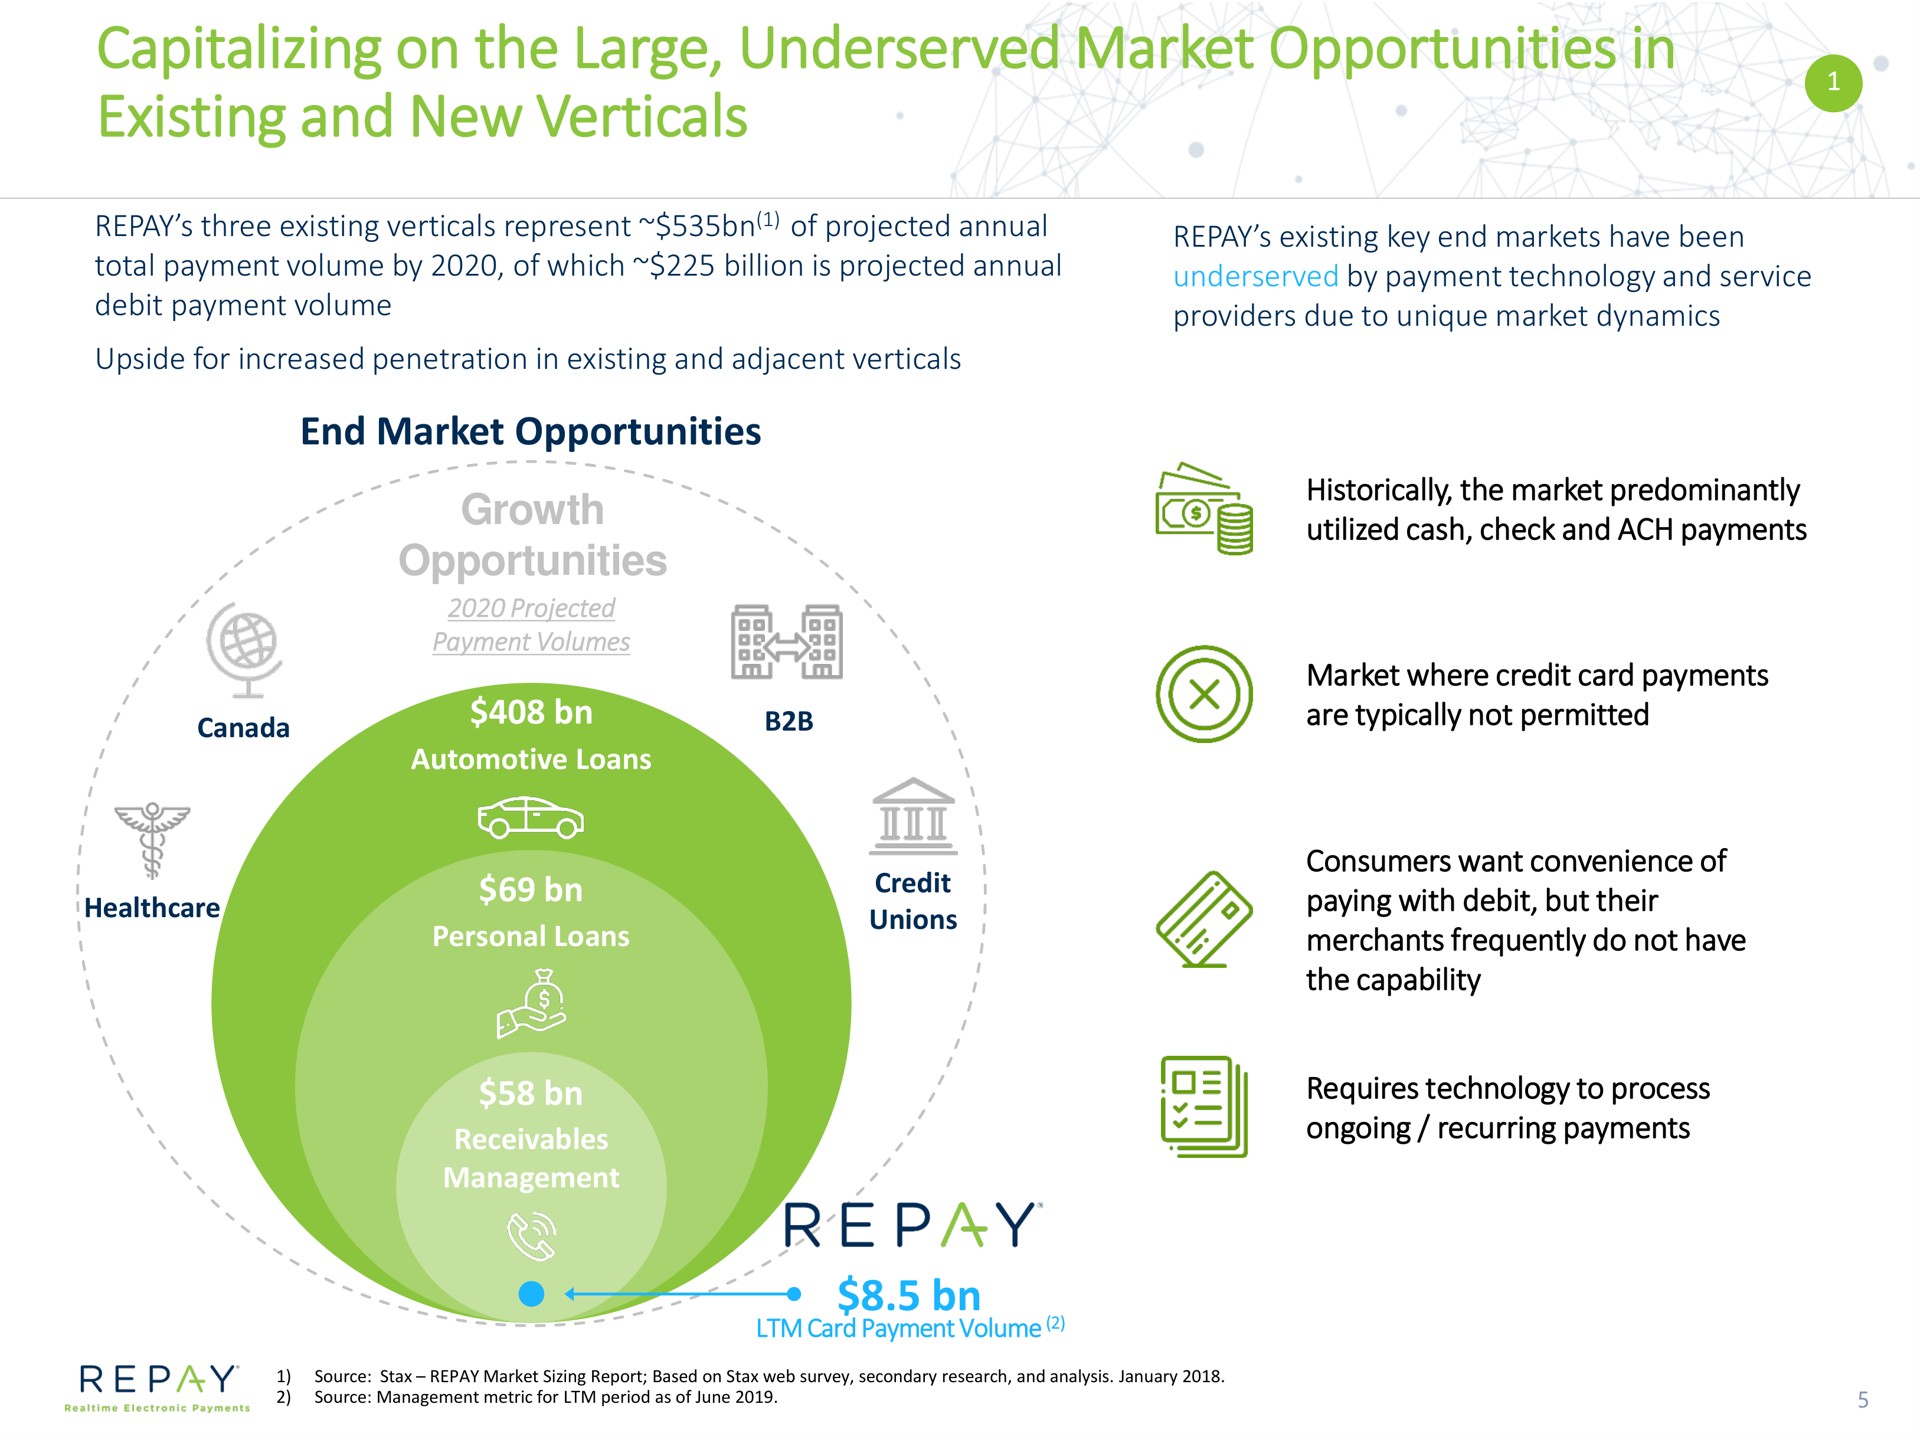 capitalizing on the large market opportunities in existing and new verticals roe | Repay